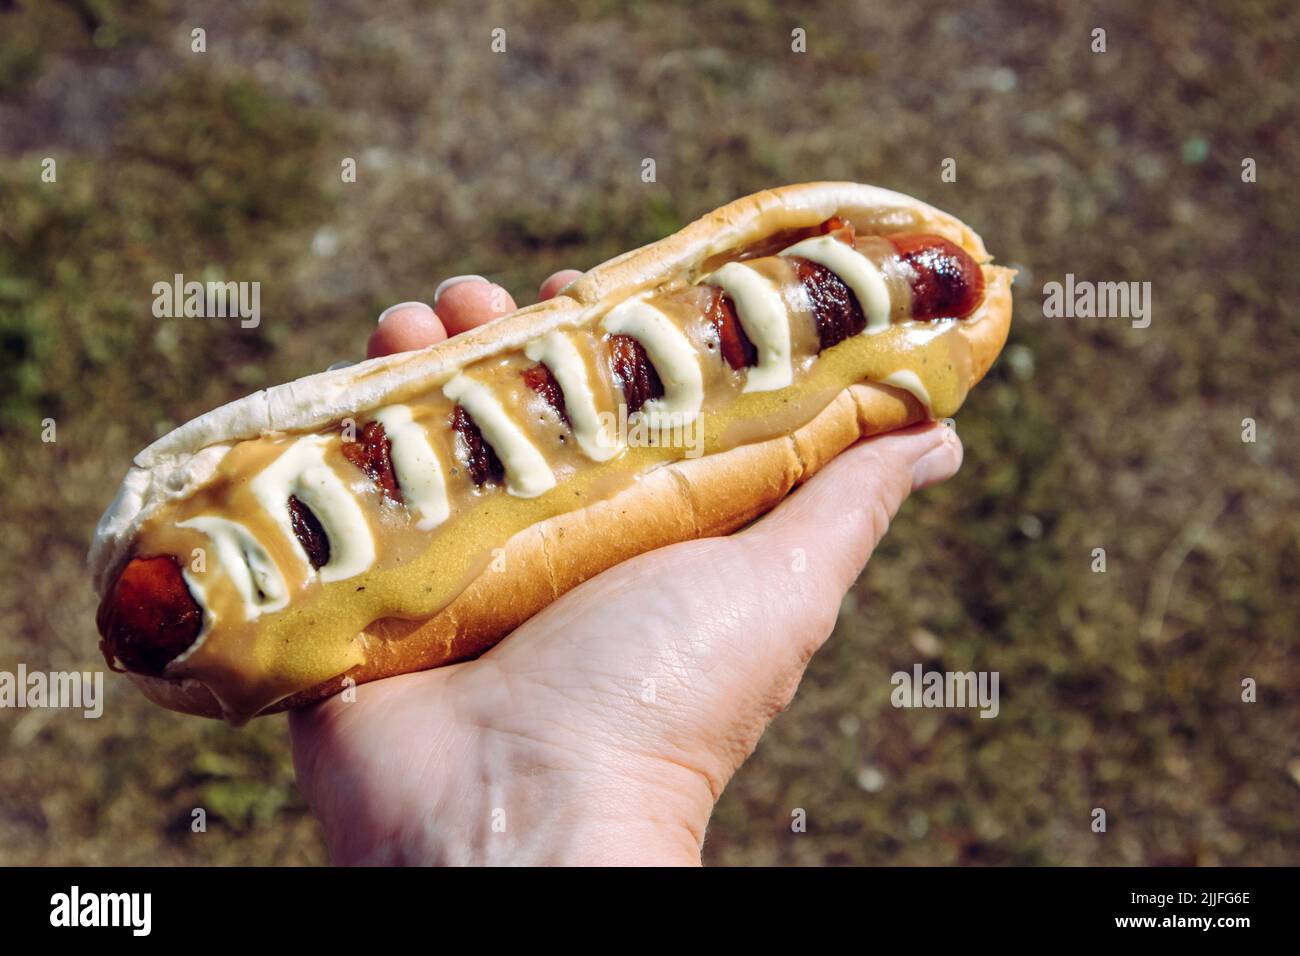 Man hand holding tasty local Icelandic food hot dog called pylsur outdoors in nature. Also called Pylsa or Pulsa. Stock Photo